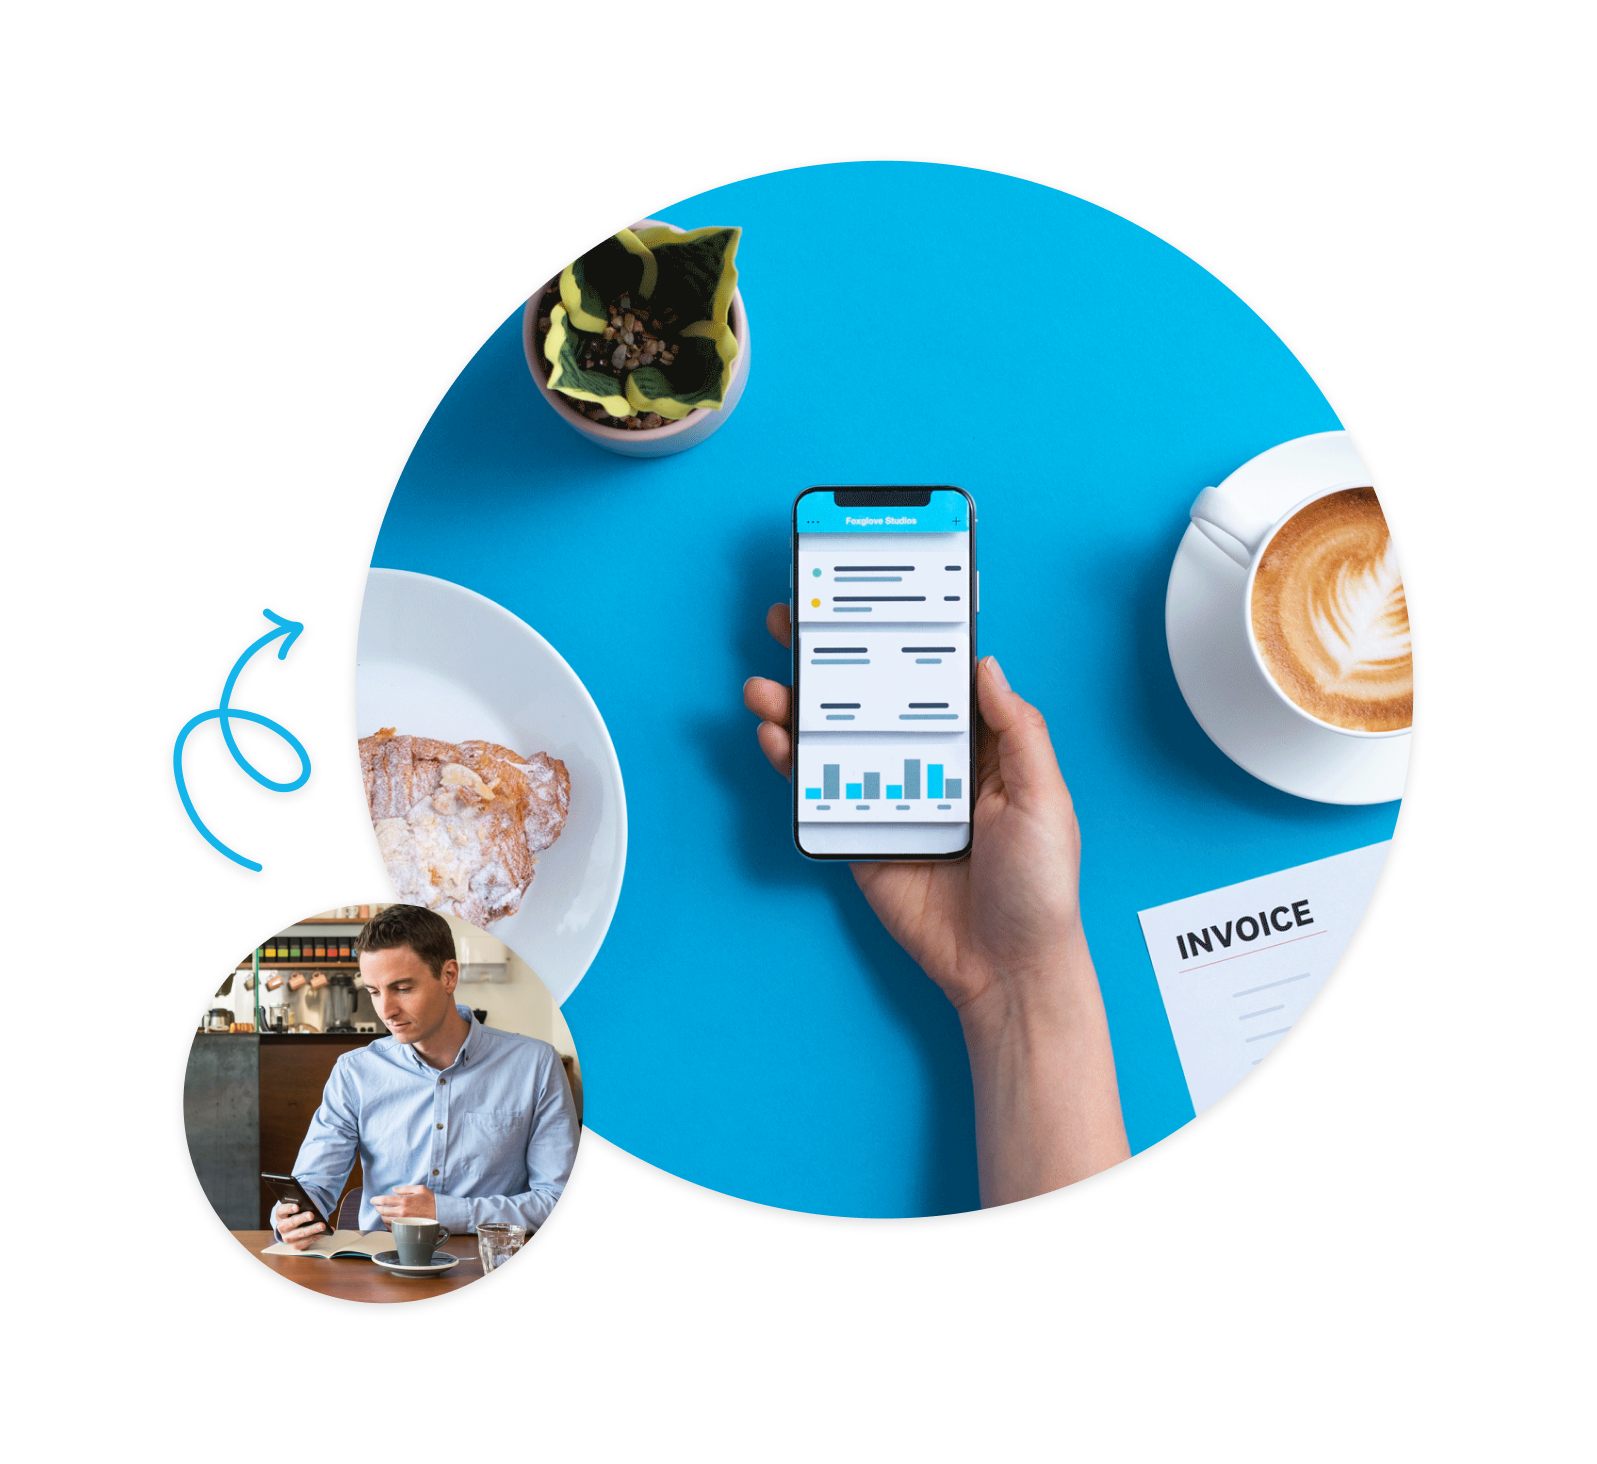 Illustration of business owner checking cash flow in the Xero accounting app.